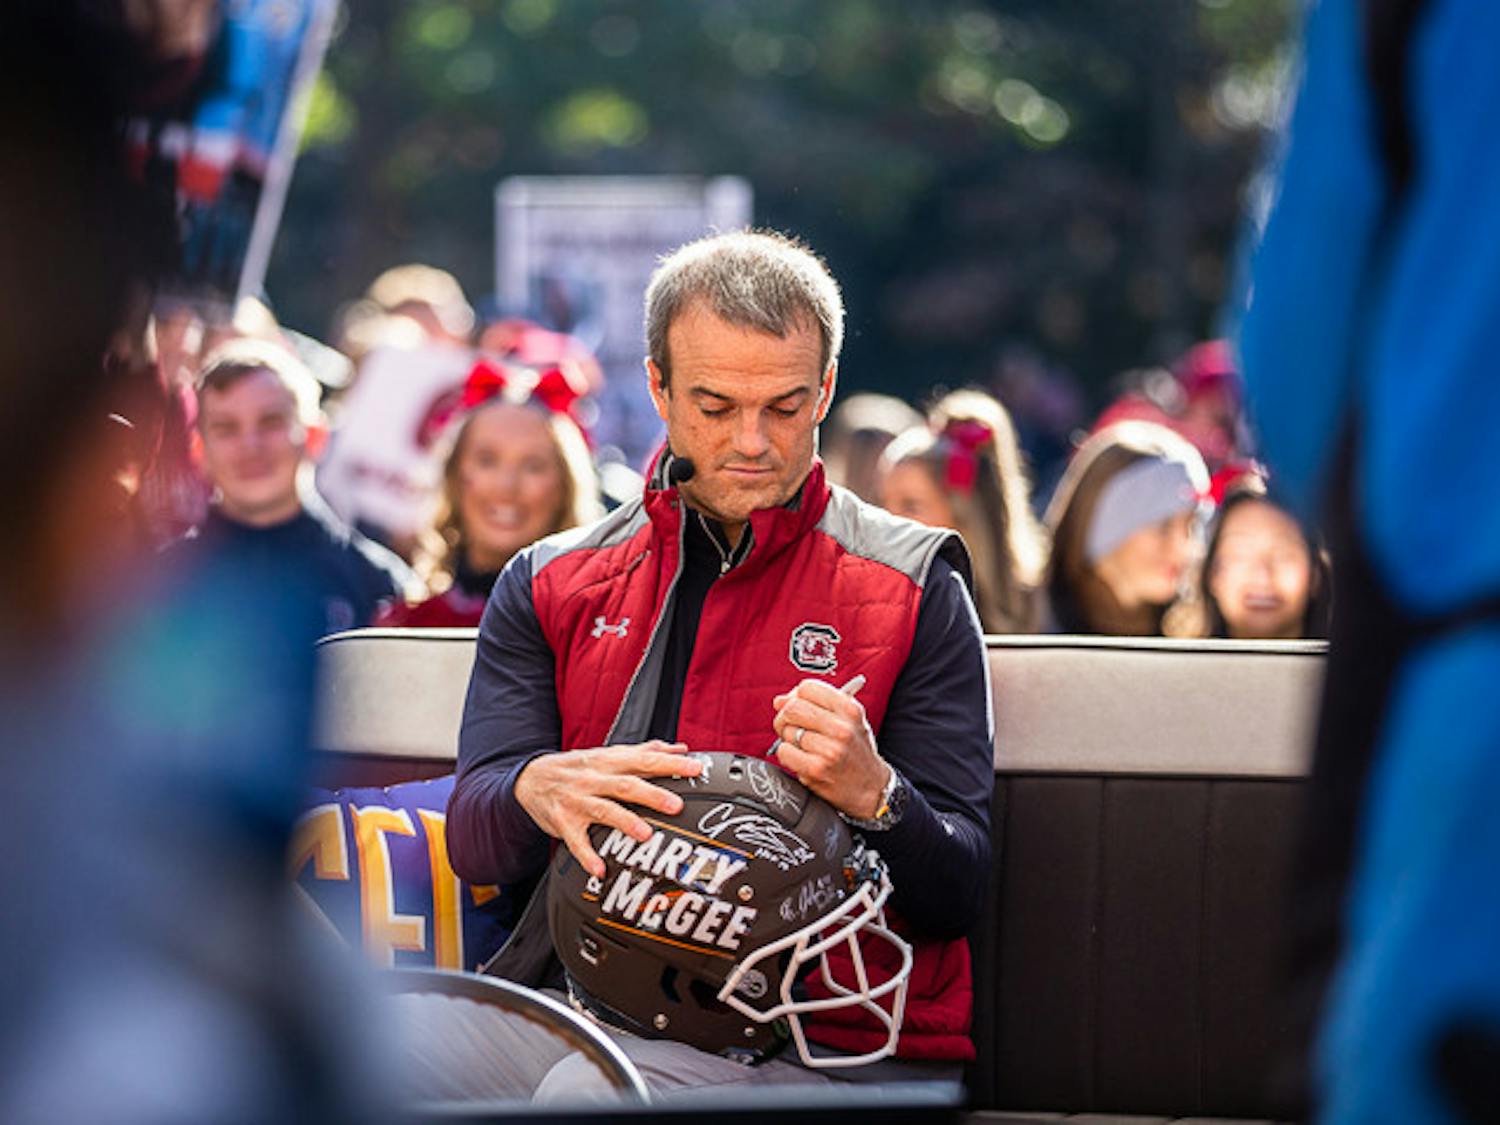 The Marty &amp; McGee and SEC Nation pregame show came to the Horseshoe on Nov. 19, 2022. The shows featured interviews with South Carolina head coach Shane Beamer, red shirt junior quarterback Spencer Rattler and other guests from across the SEC and from the University of South Carolina.&nbsp;